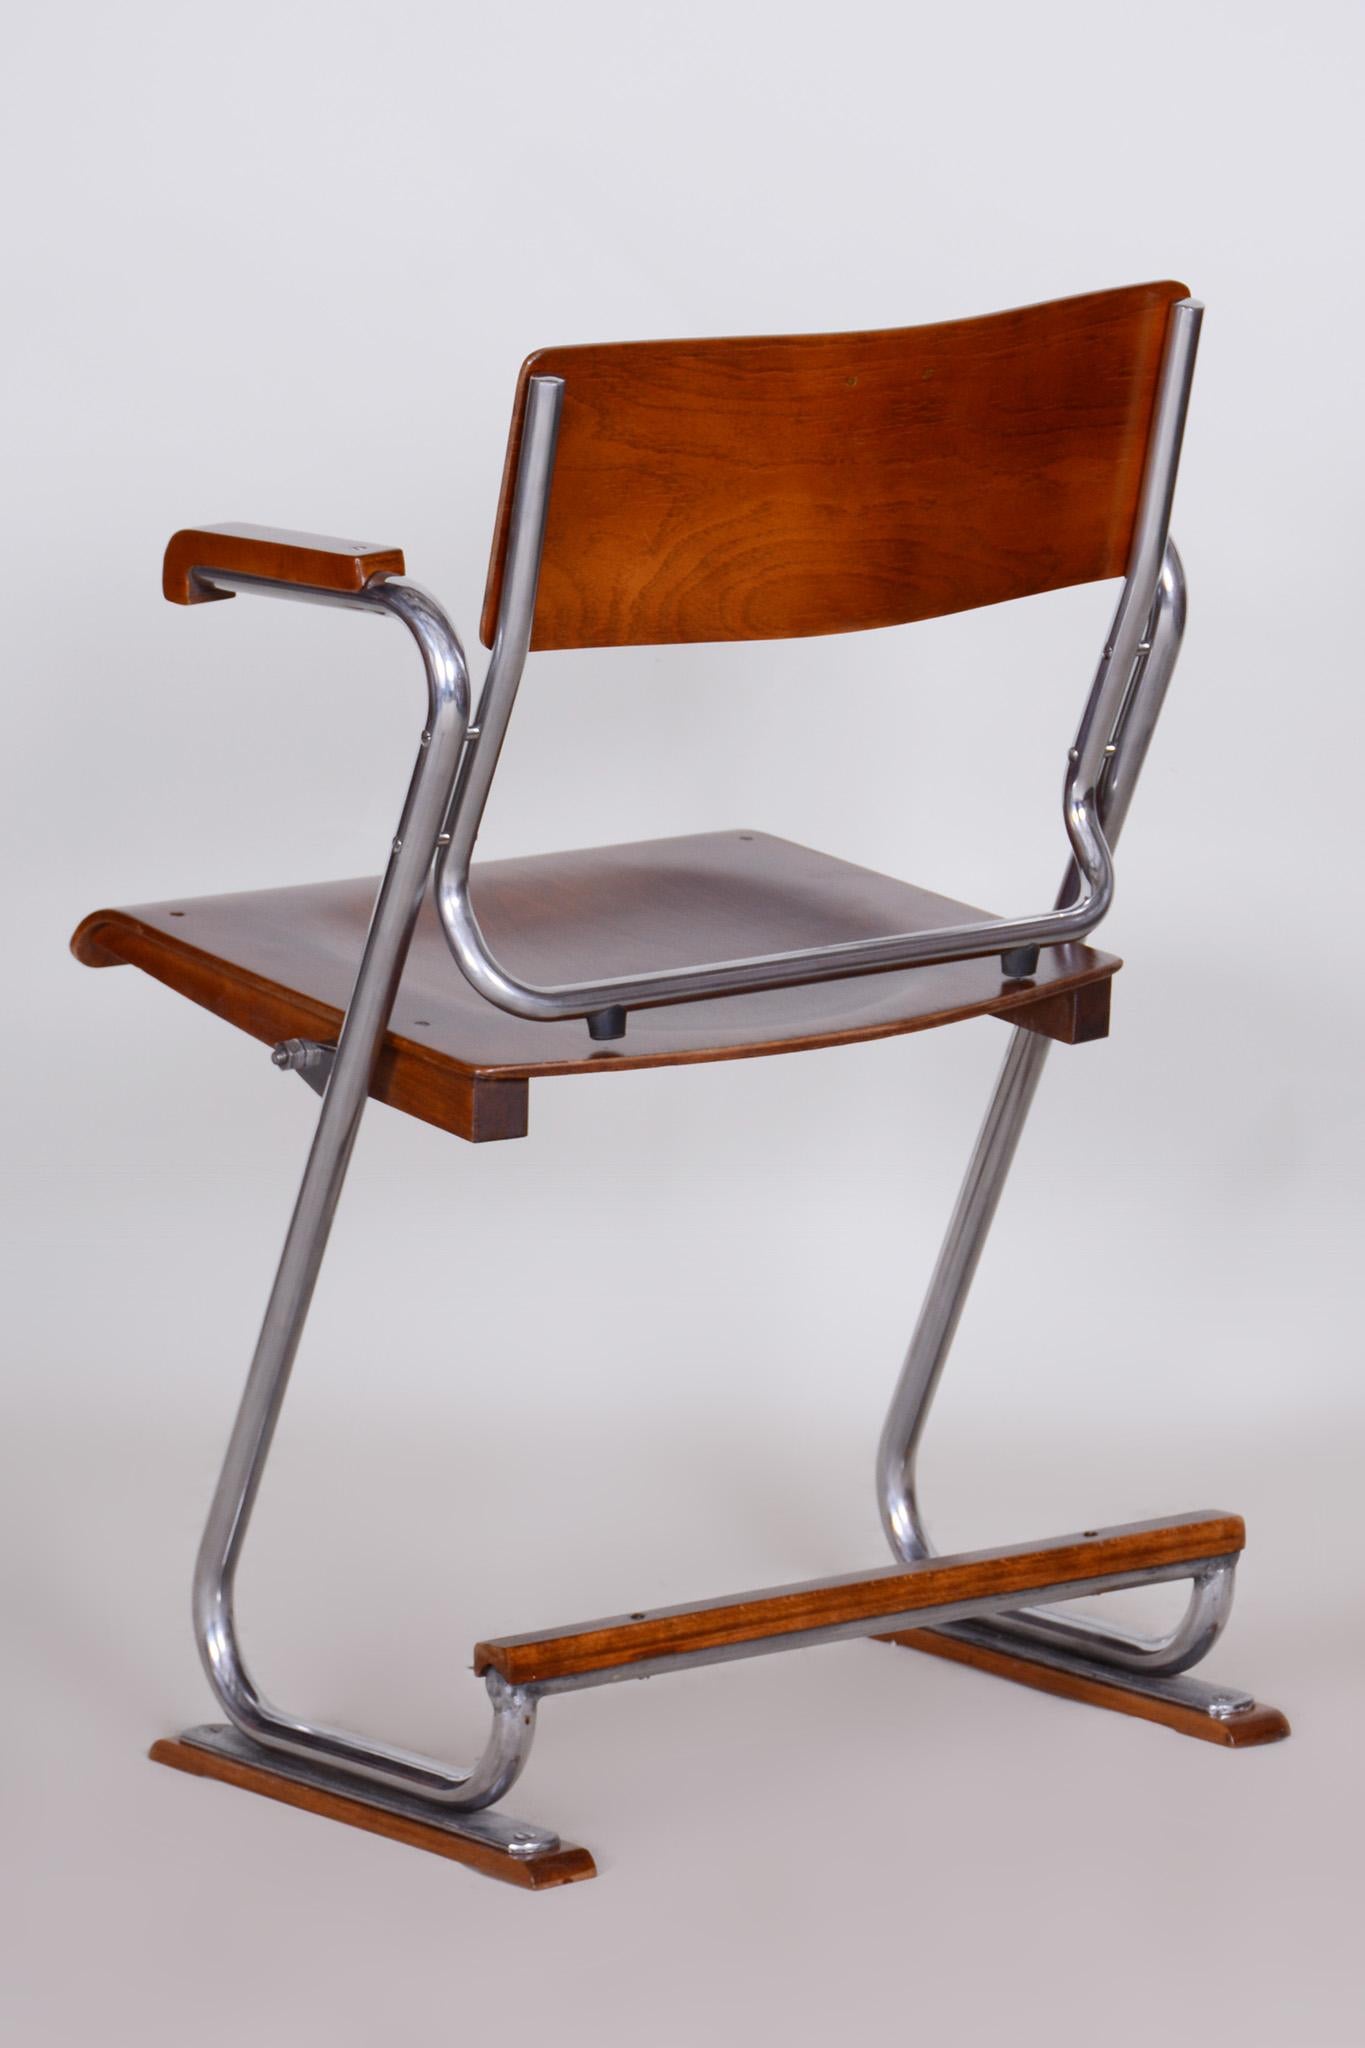 Restored Bauhaus Folding Chair, Beech Plywood, Revived Polish, Czechia, 1930s For Sale 3